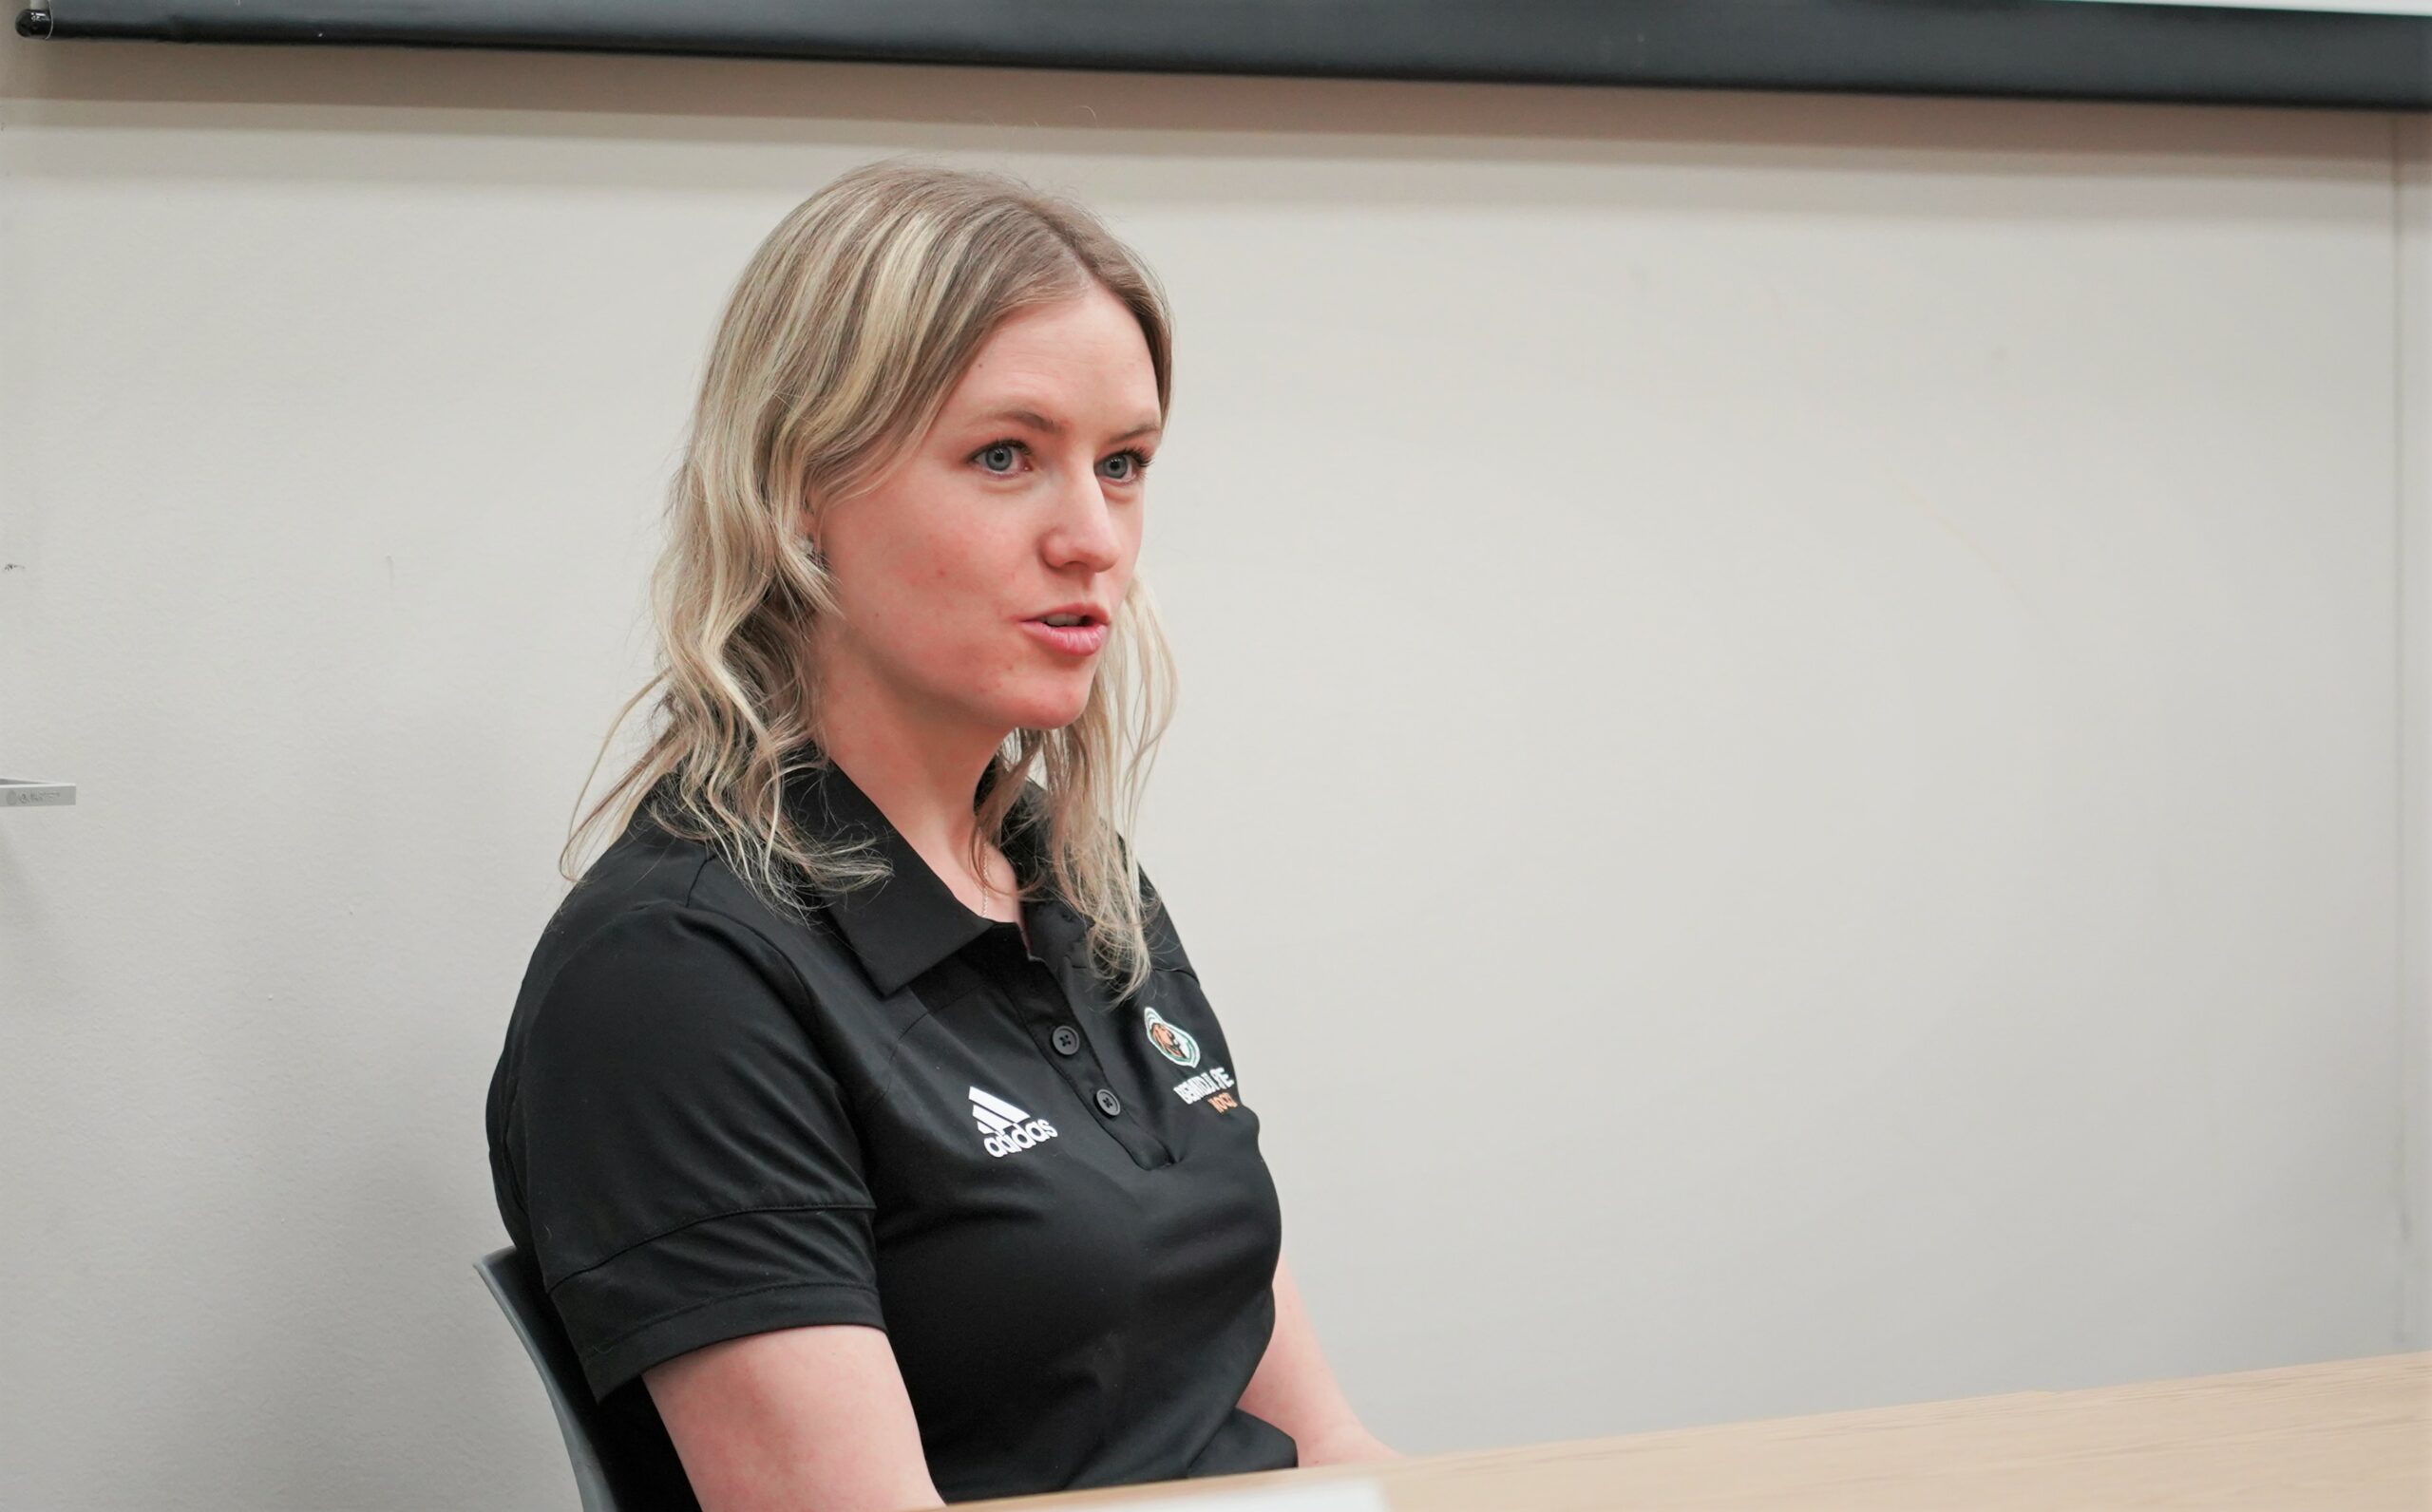 Emma Terres-Sobieck, a former BSU women's hockey player and a current assistant coach for the Beavers, discusses Title IX during a speaker panel on Wednesday, Feb. 1, 2023, in the Beaver Pride Room.